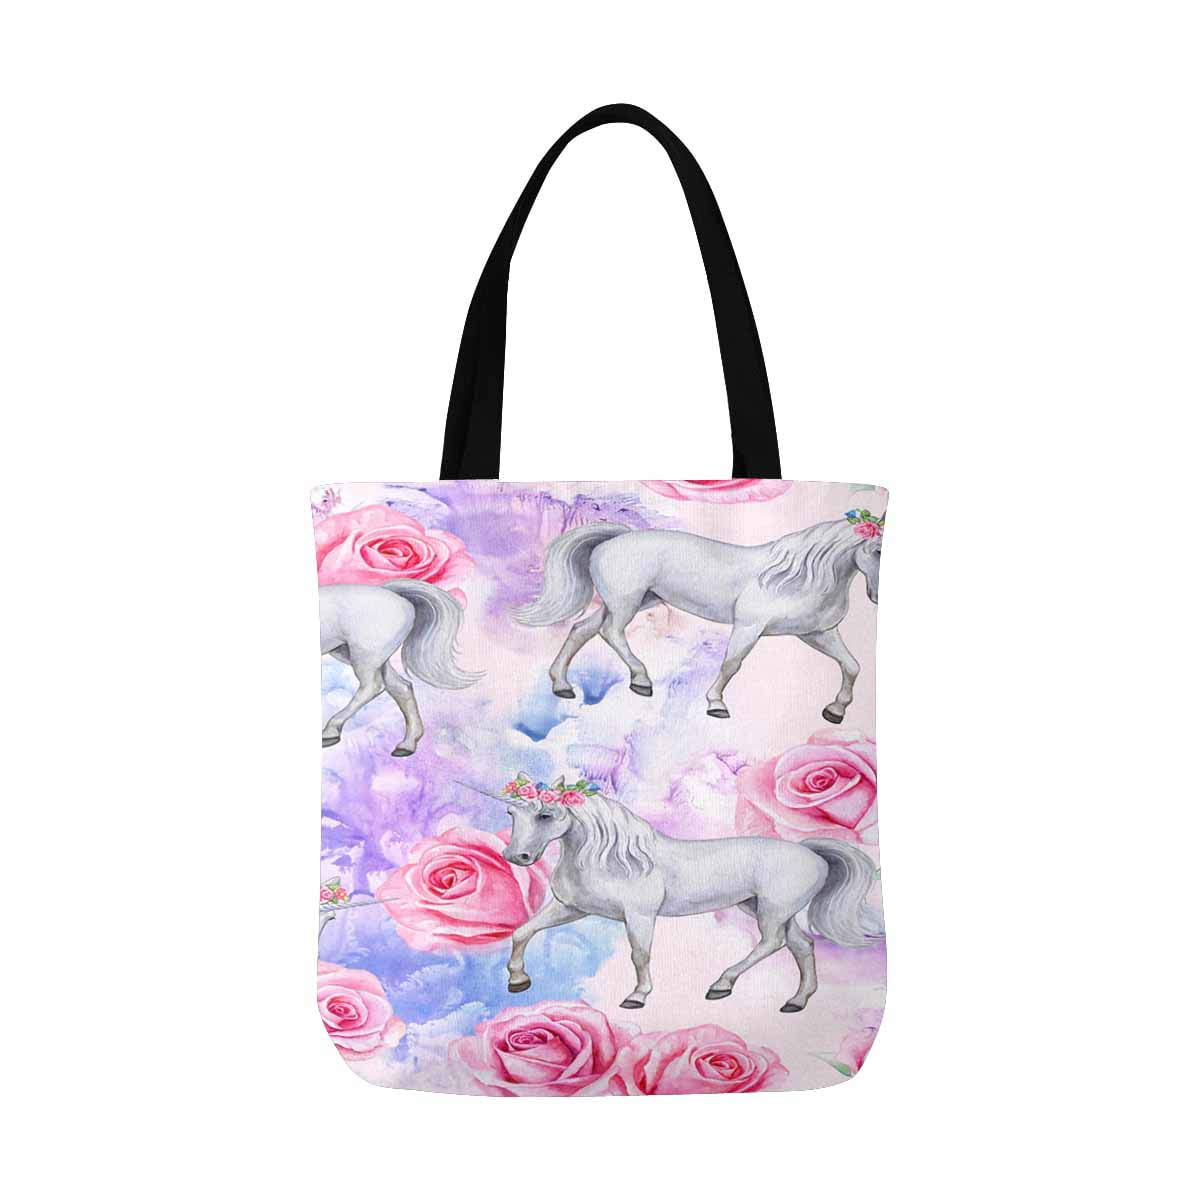 ASHLEIGH Unicorn Pink Roses Reusable Grocery Bags Shopping Bag Canvas ...